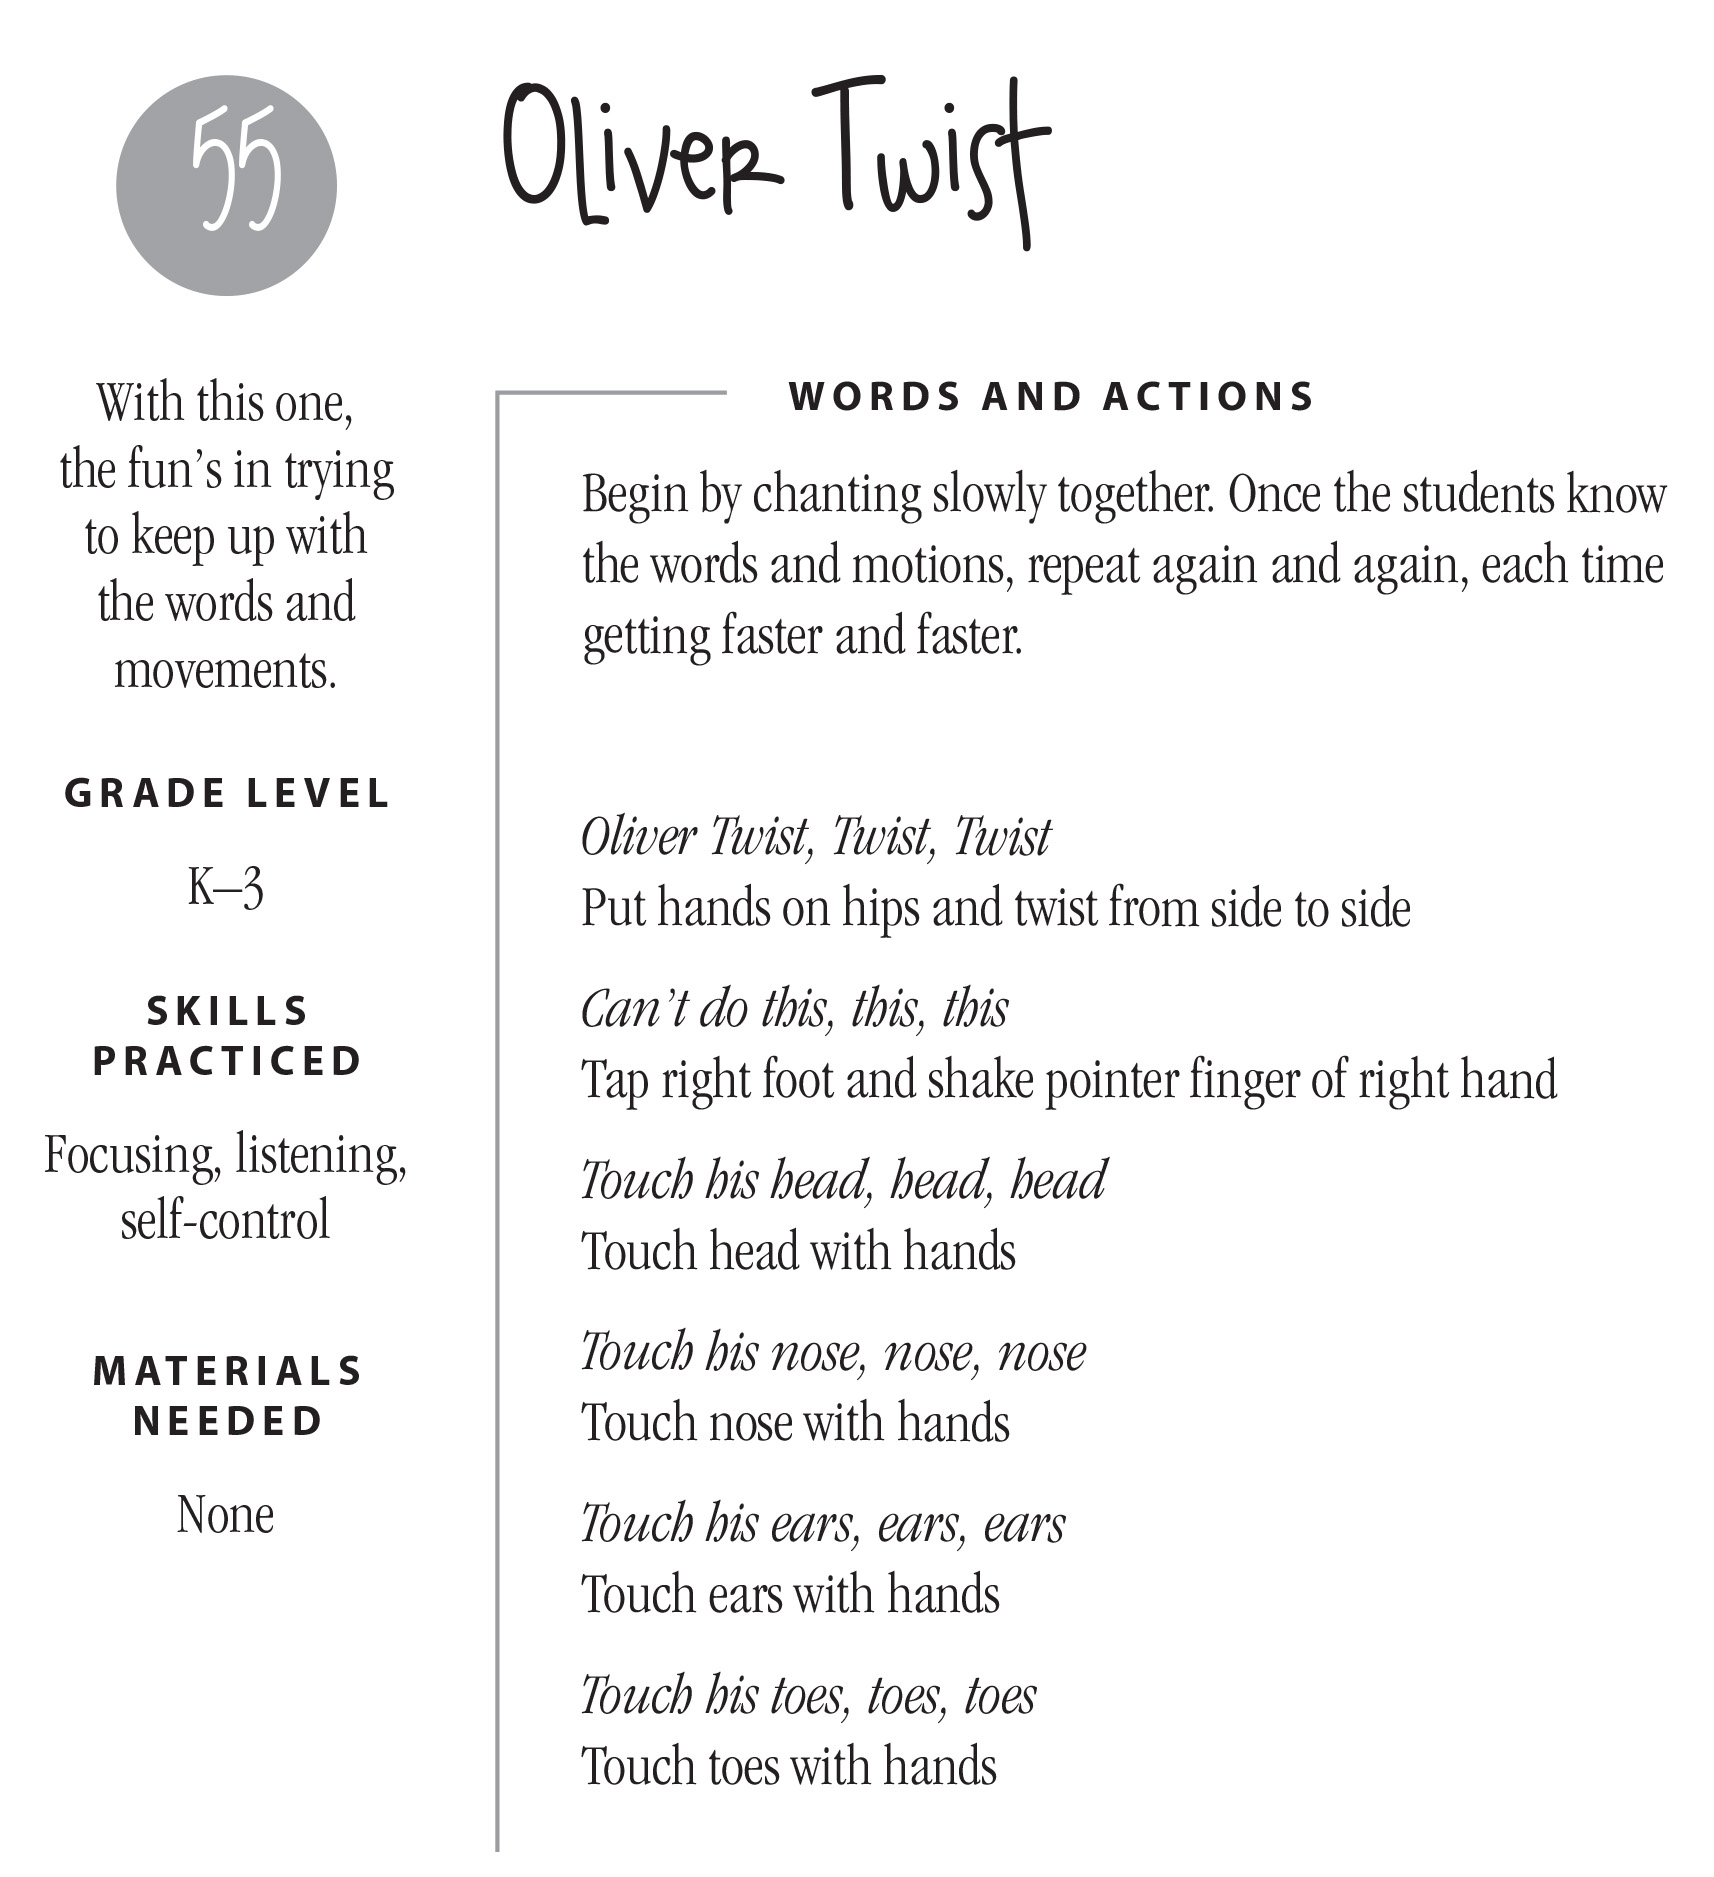 An Image of the energizer called Oliver Twist